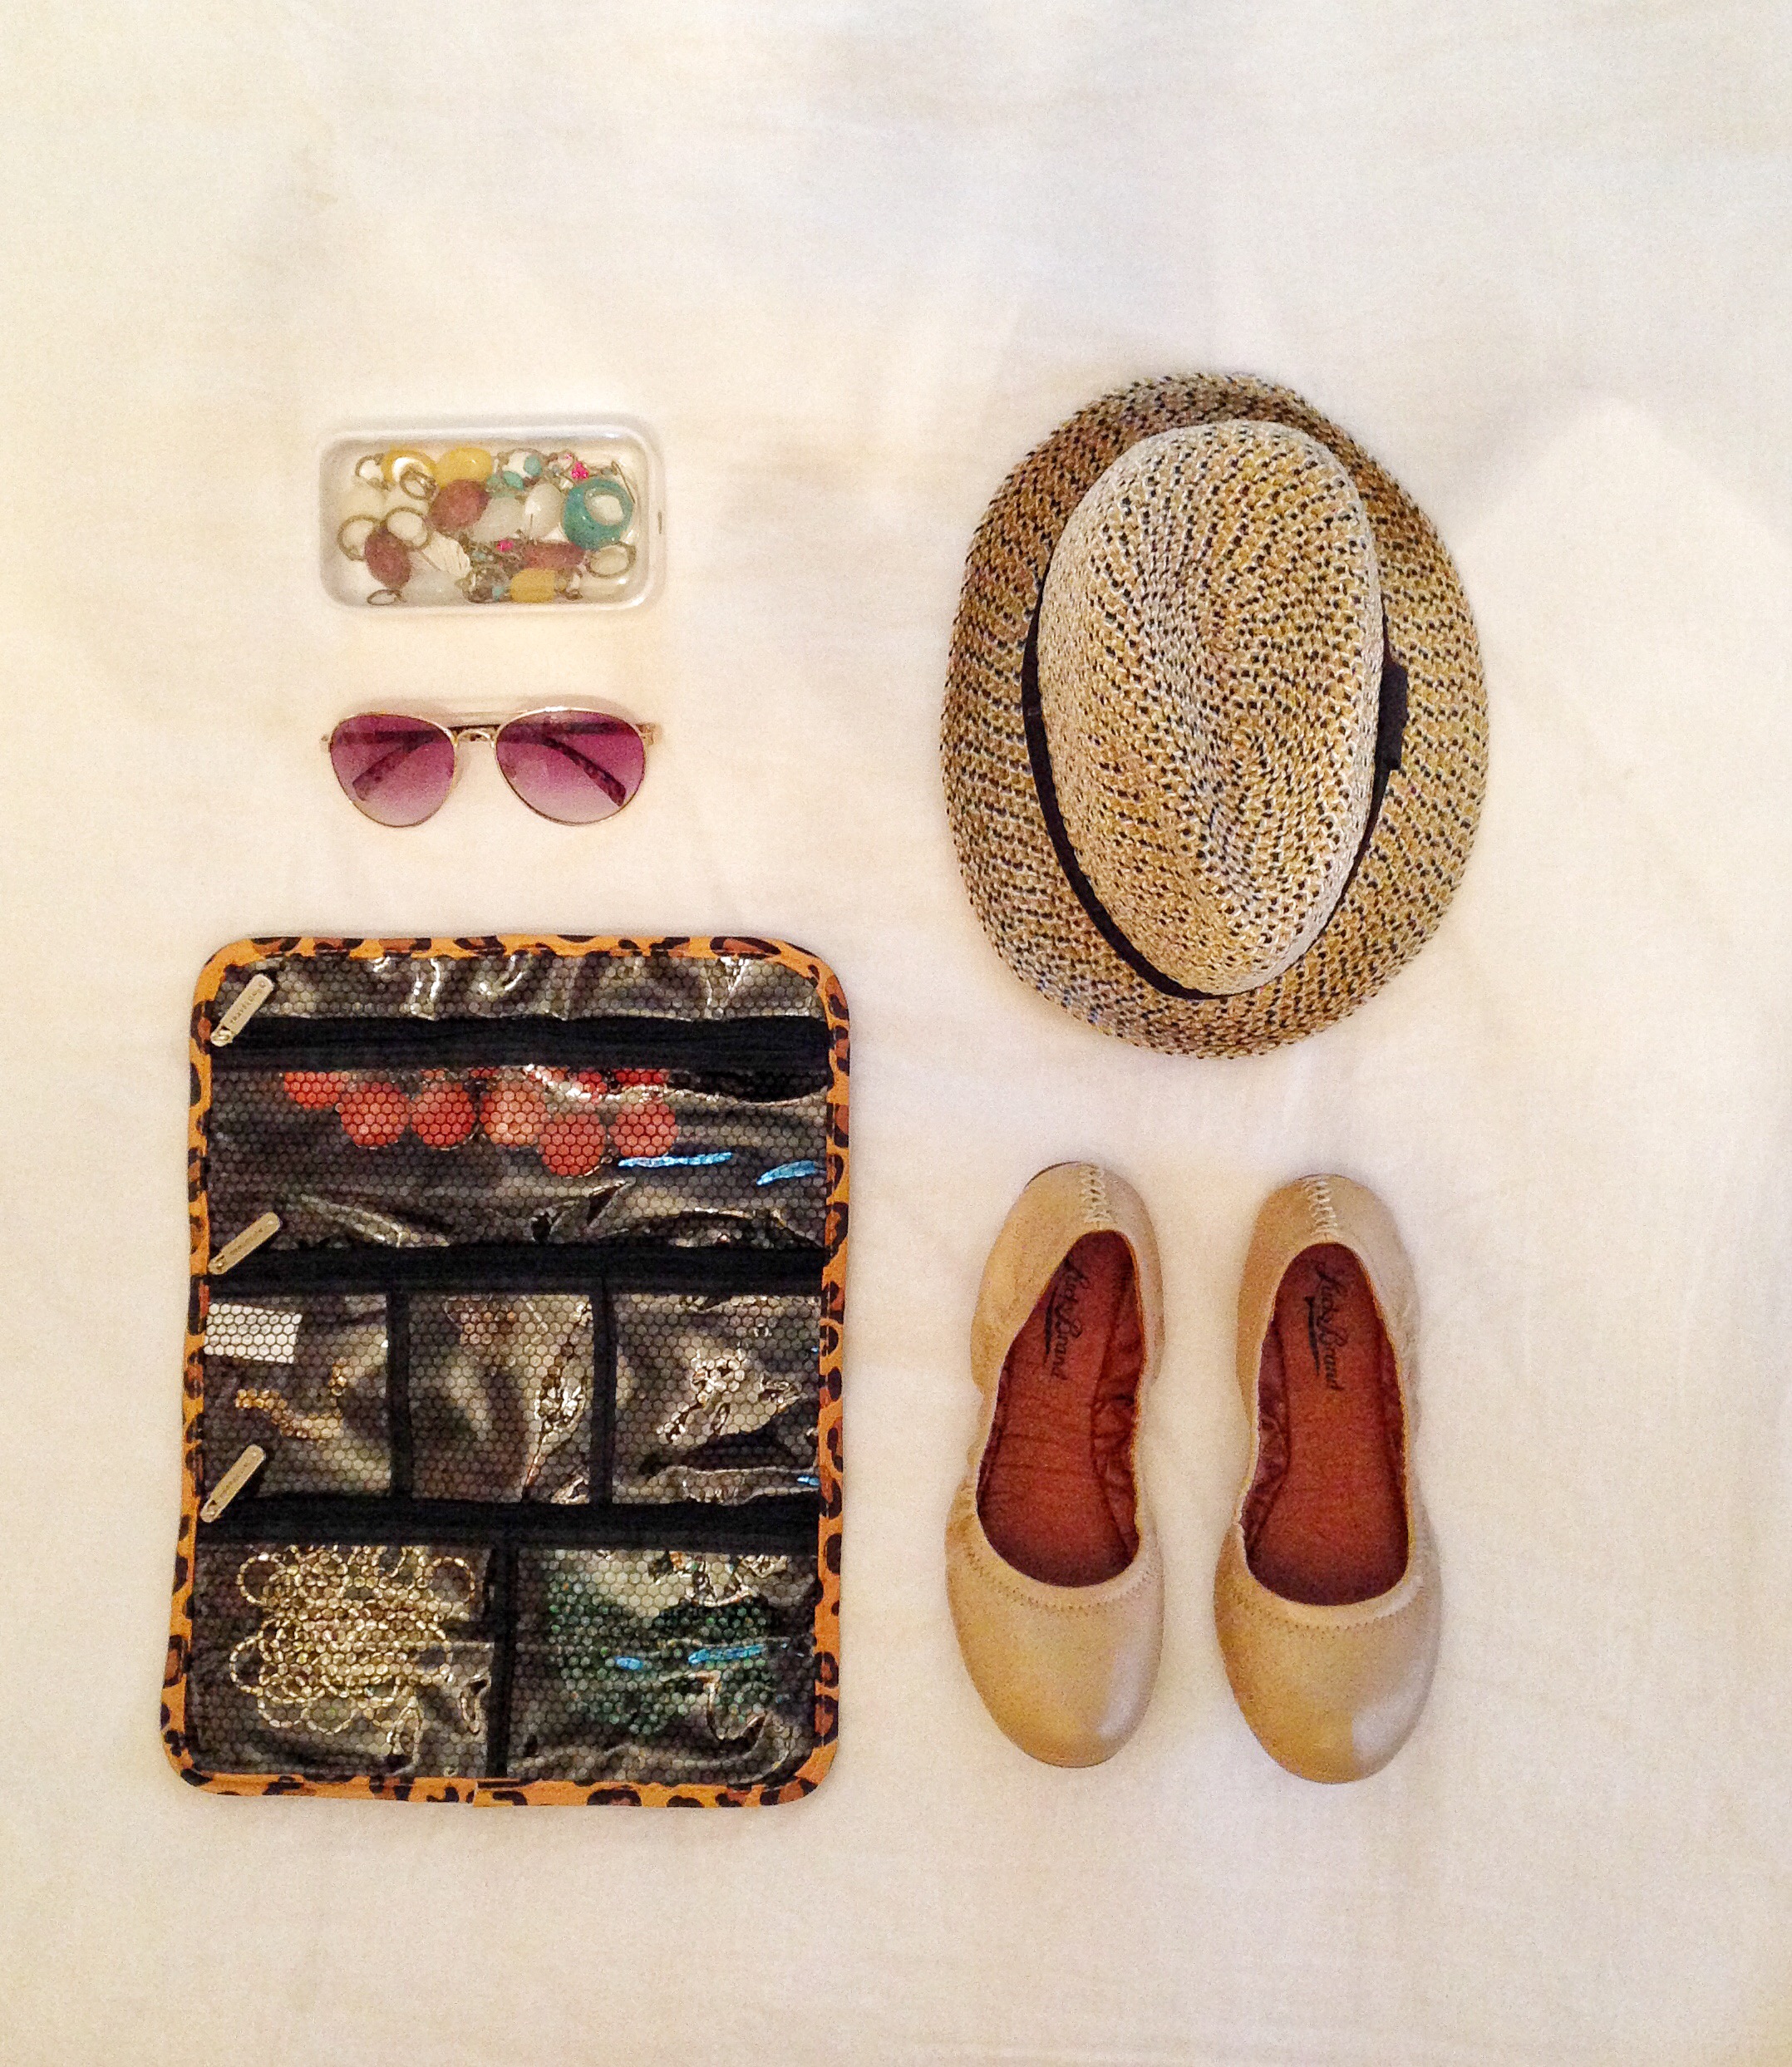 Packing Like A Pro! Part 1 - TRAVEL'S A DANCE AWAY